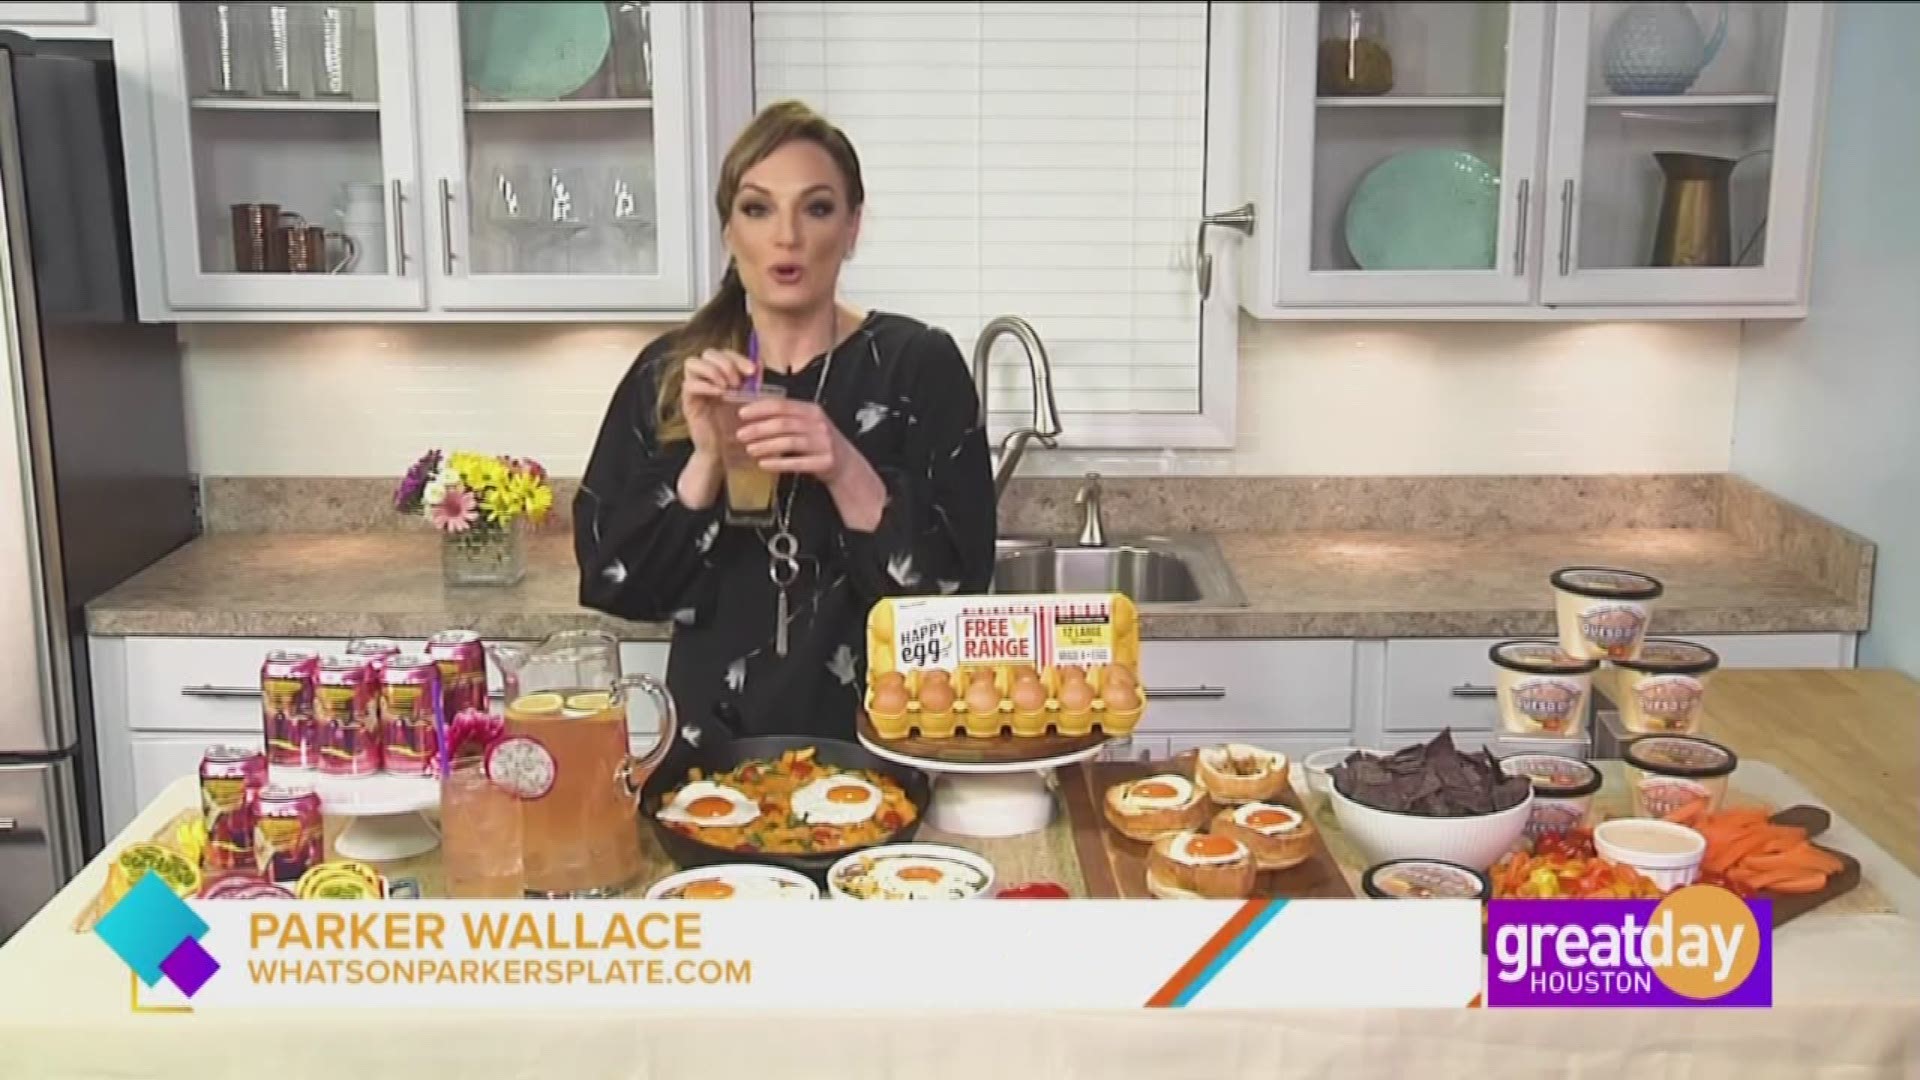 Family meals are about to get a flavor makeover, thanks to Parker Wallace from Parker’s Plate. She’s sharing some tips to elevate the family table experience!